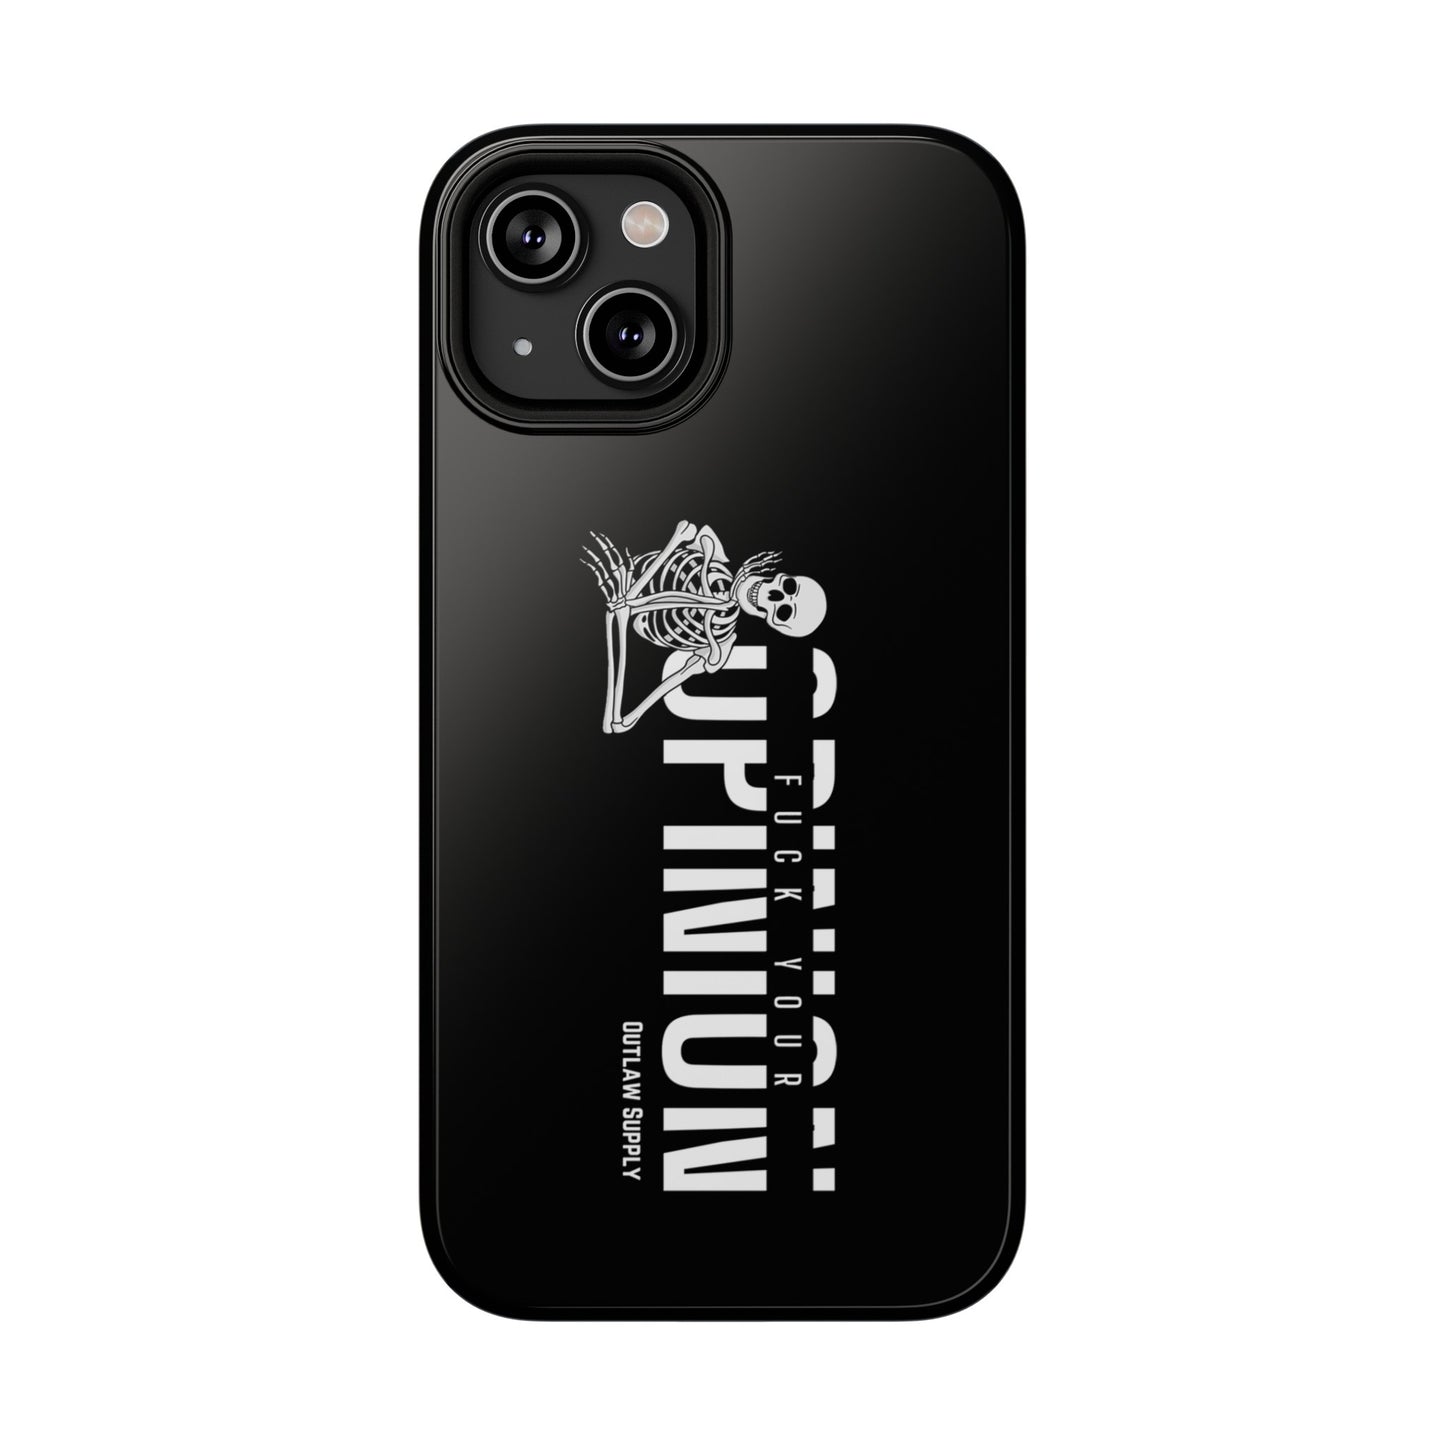 F Your Opinion Impact-Resistant Phone Case